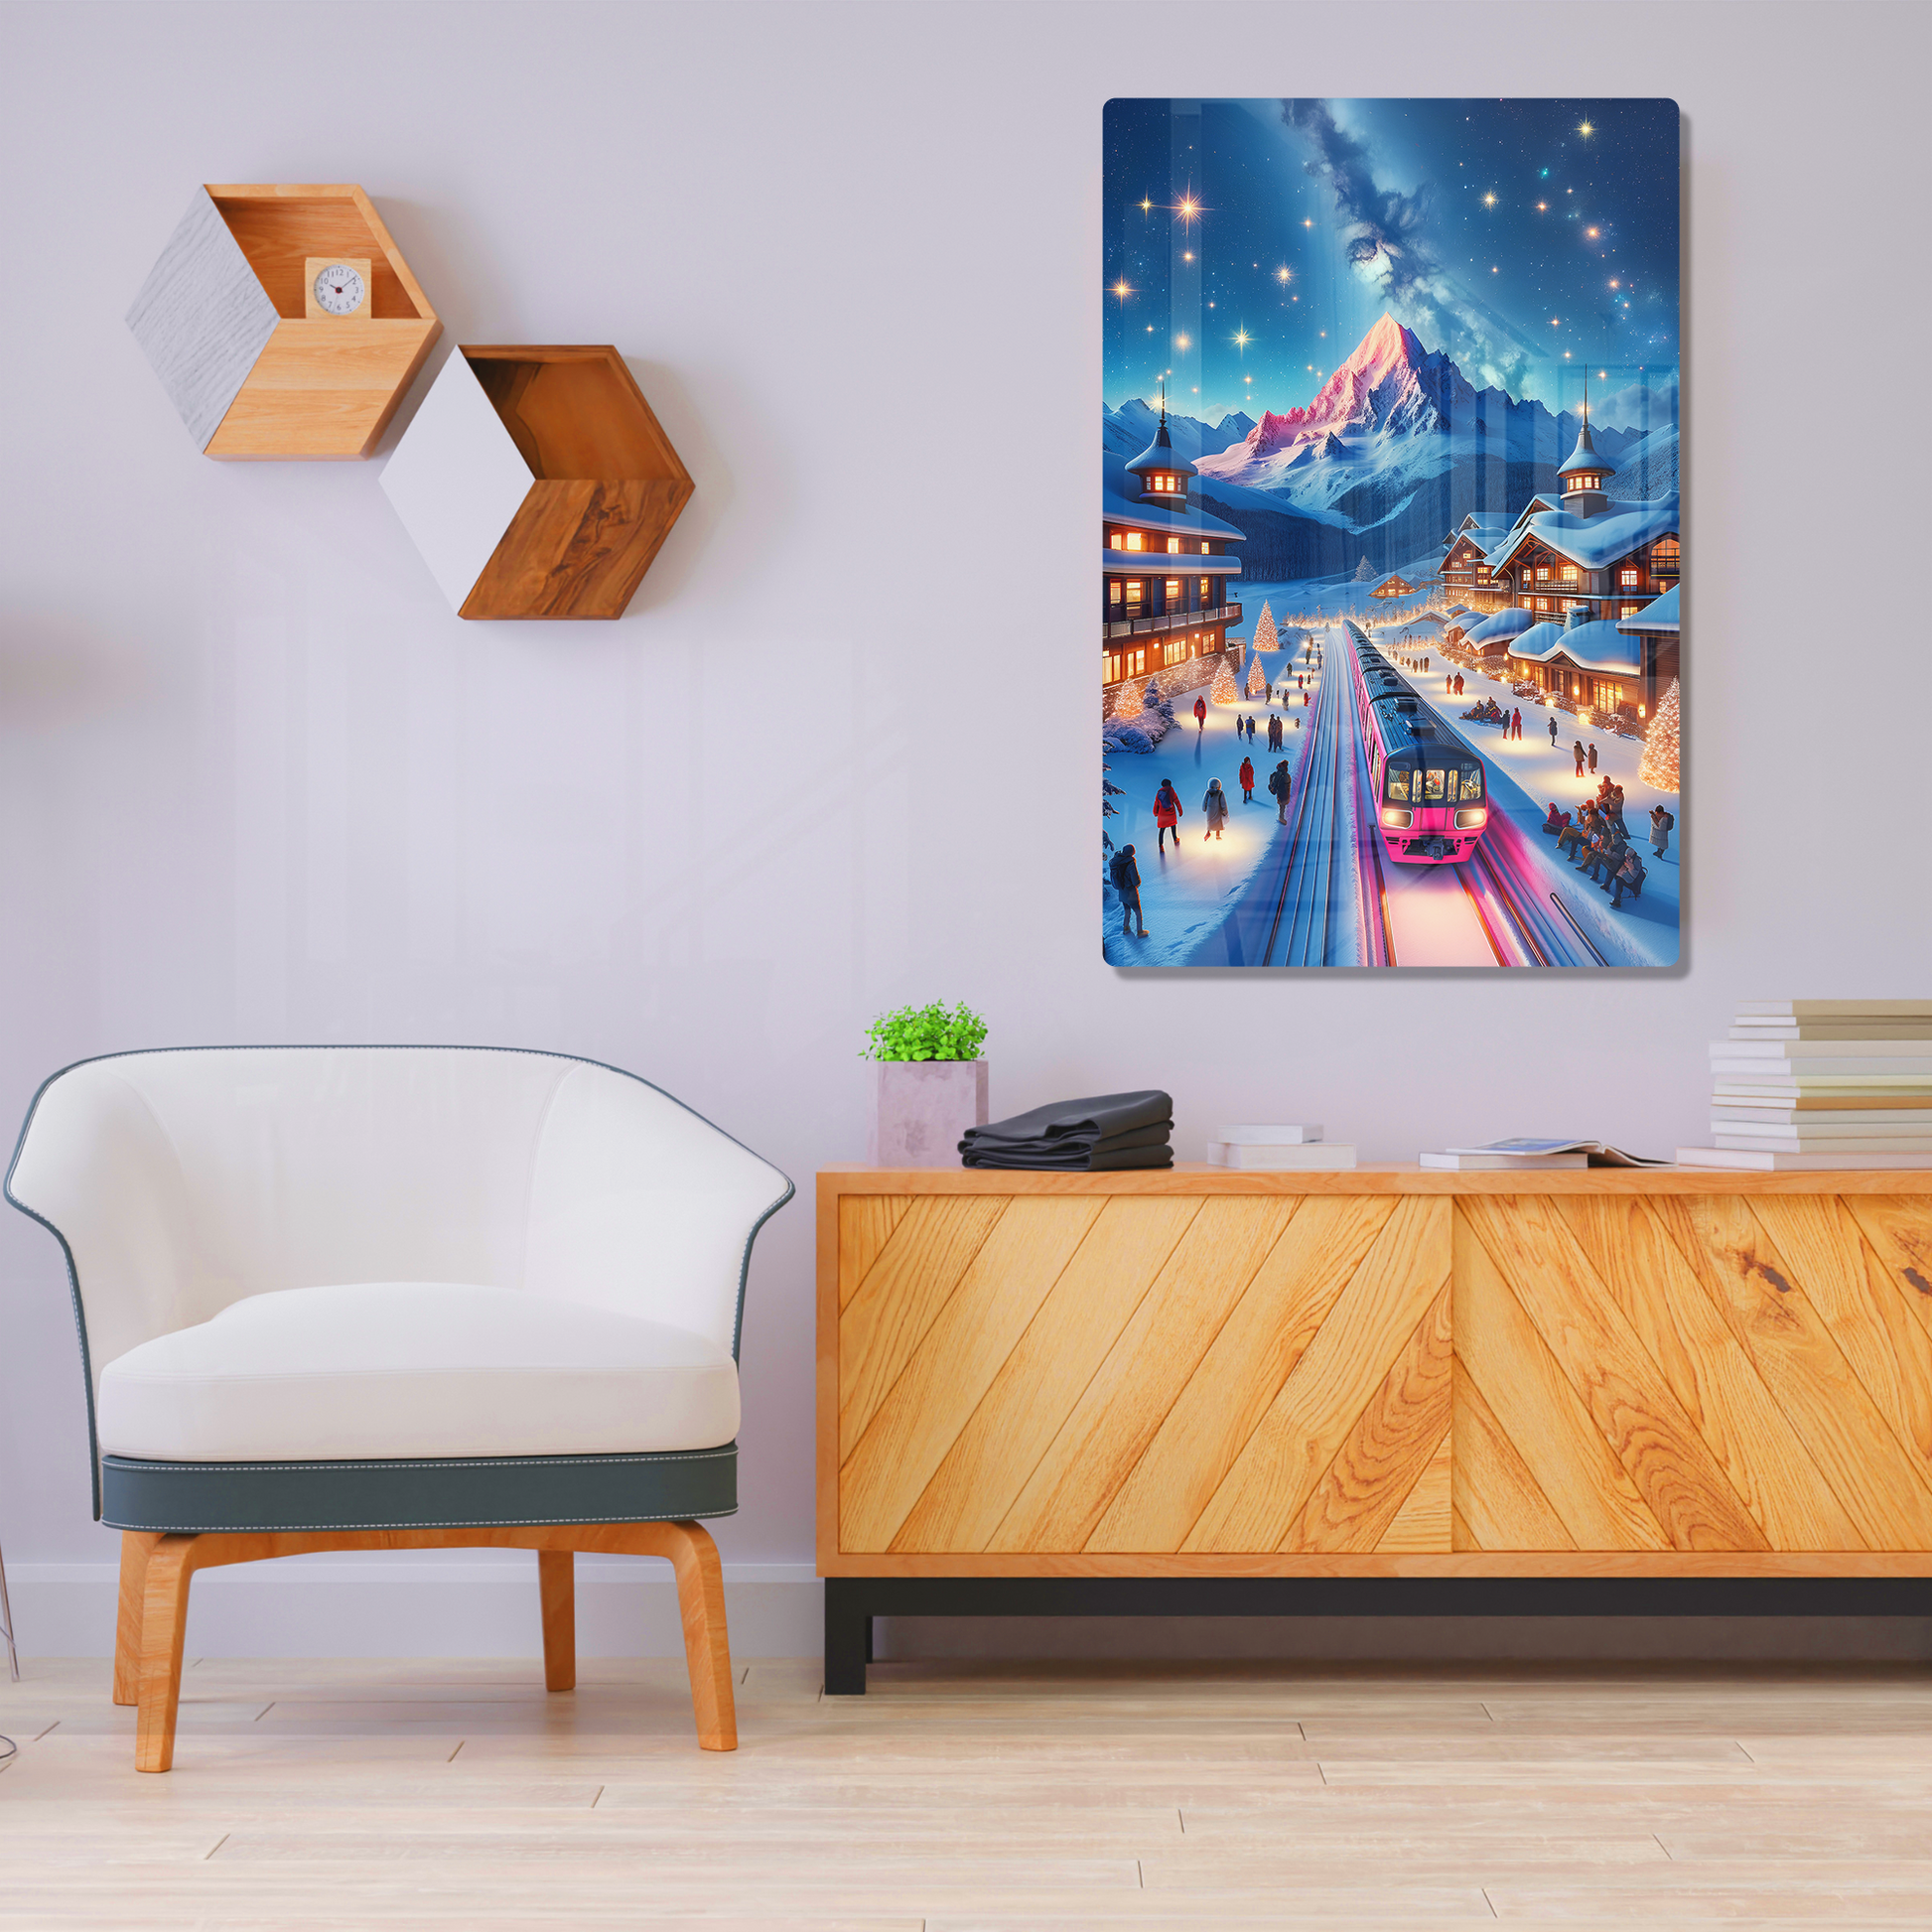 Starry Mountain Eve (Acrylic)Make a statement with Starry Mountain Eve acrylic prints. The 1⁄4" acrylic panel exudes the illusion of a smooth glass surface for vibrant artwork. Pre-installed hanRimaGallery